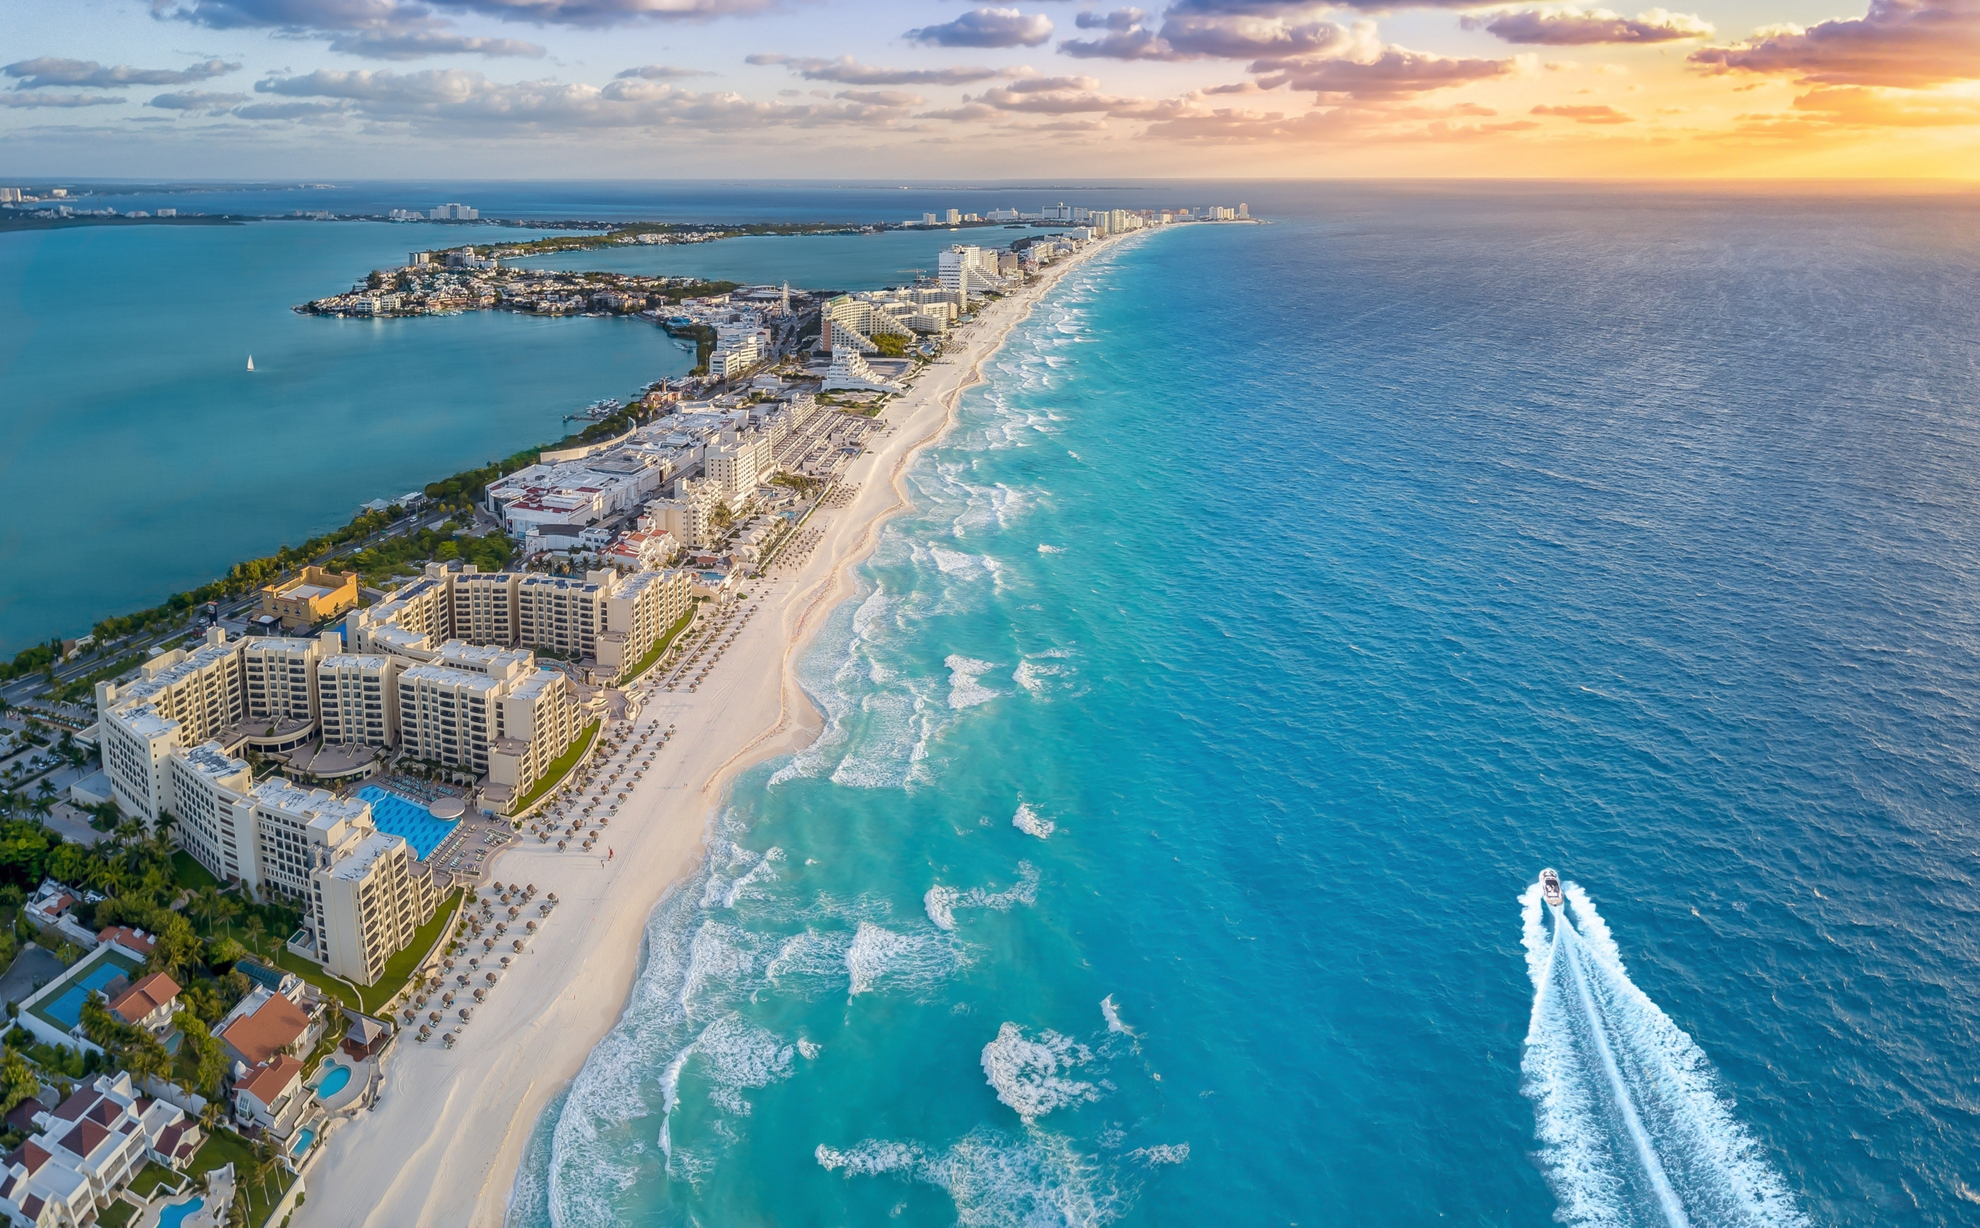 Snag one of these Blue Monday travel deals and take a long stroll on the beach in Cancun